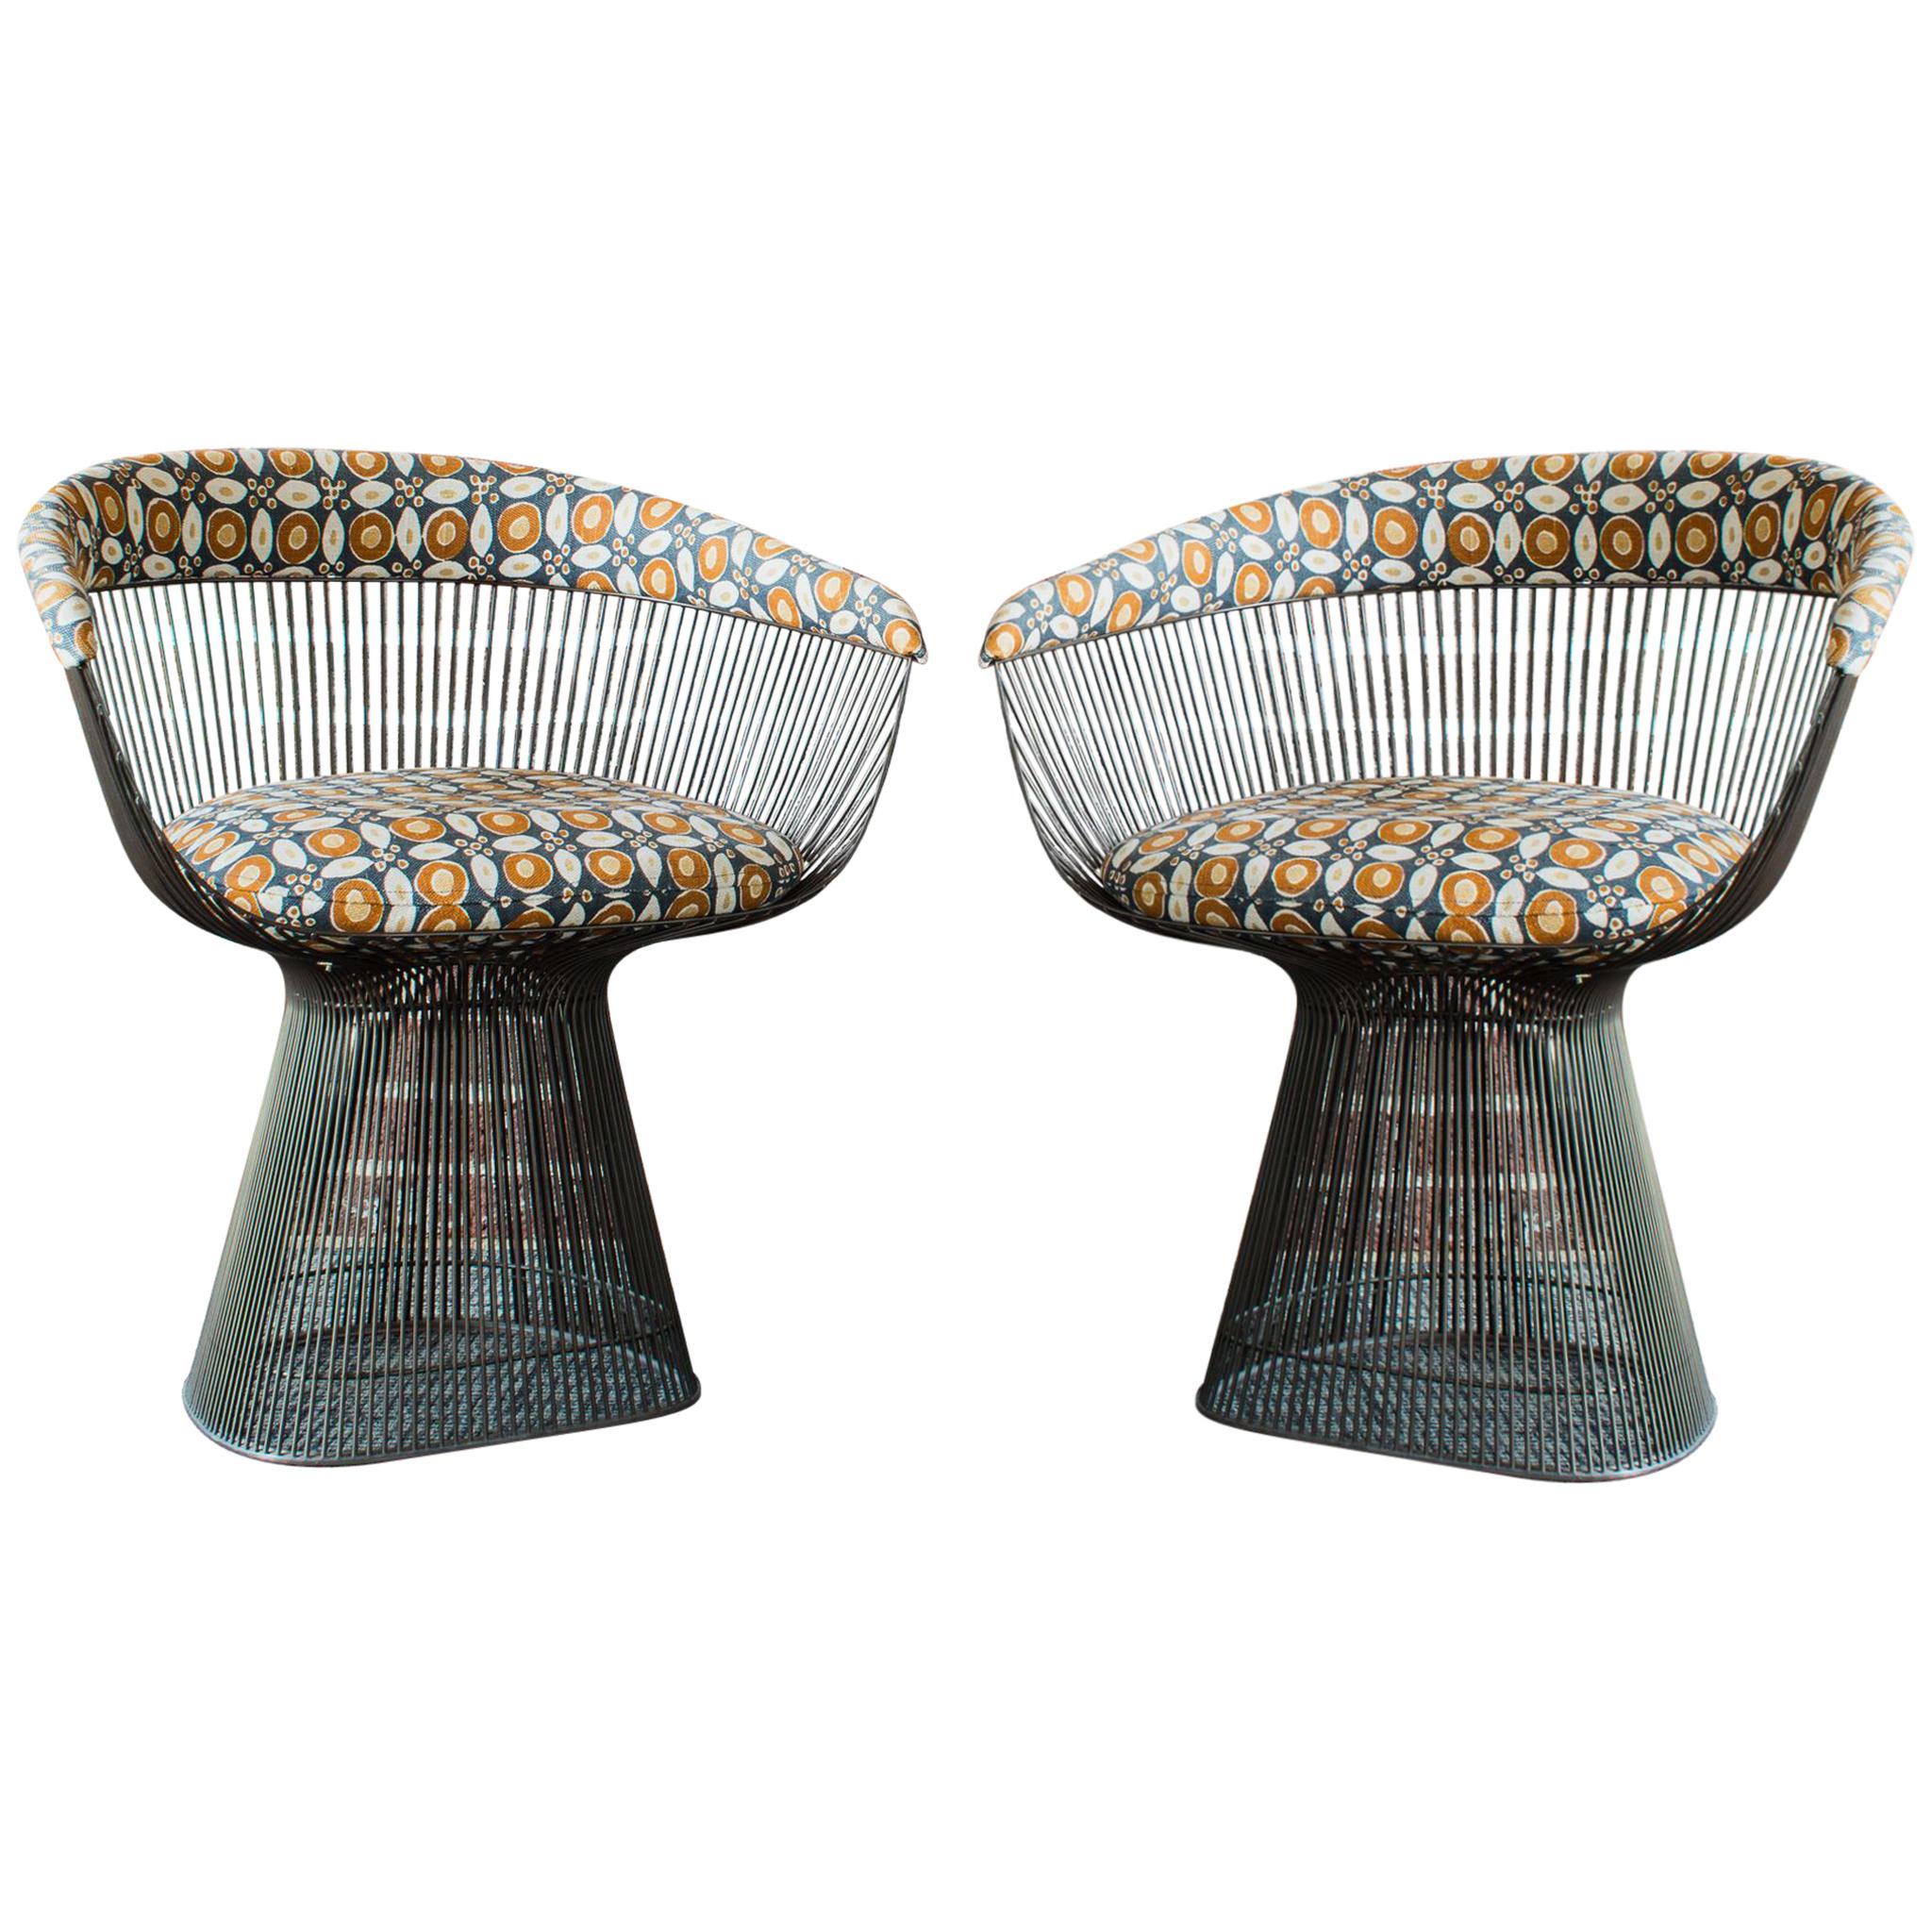 Pair of Bronze Accent Chairs by Warren Platner for Knoll